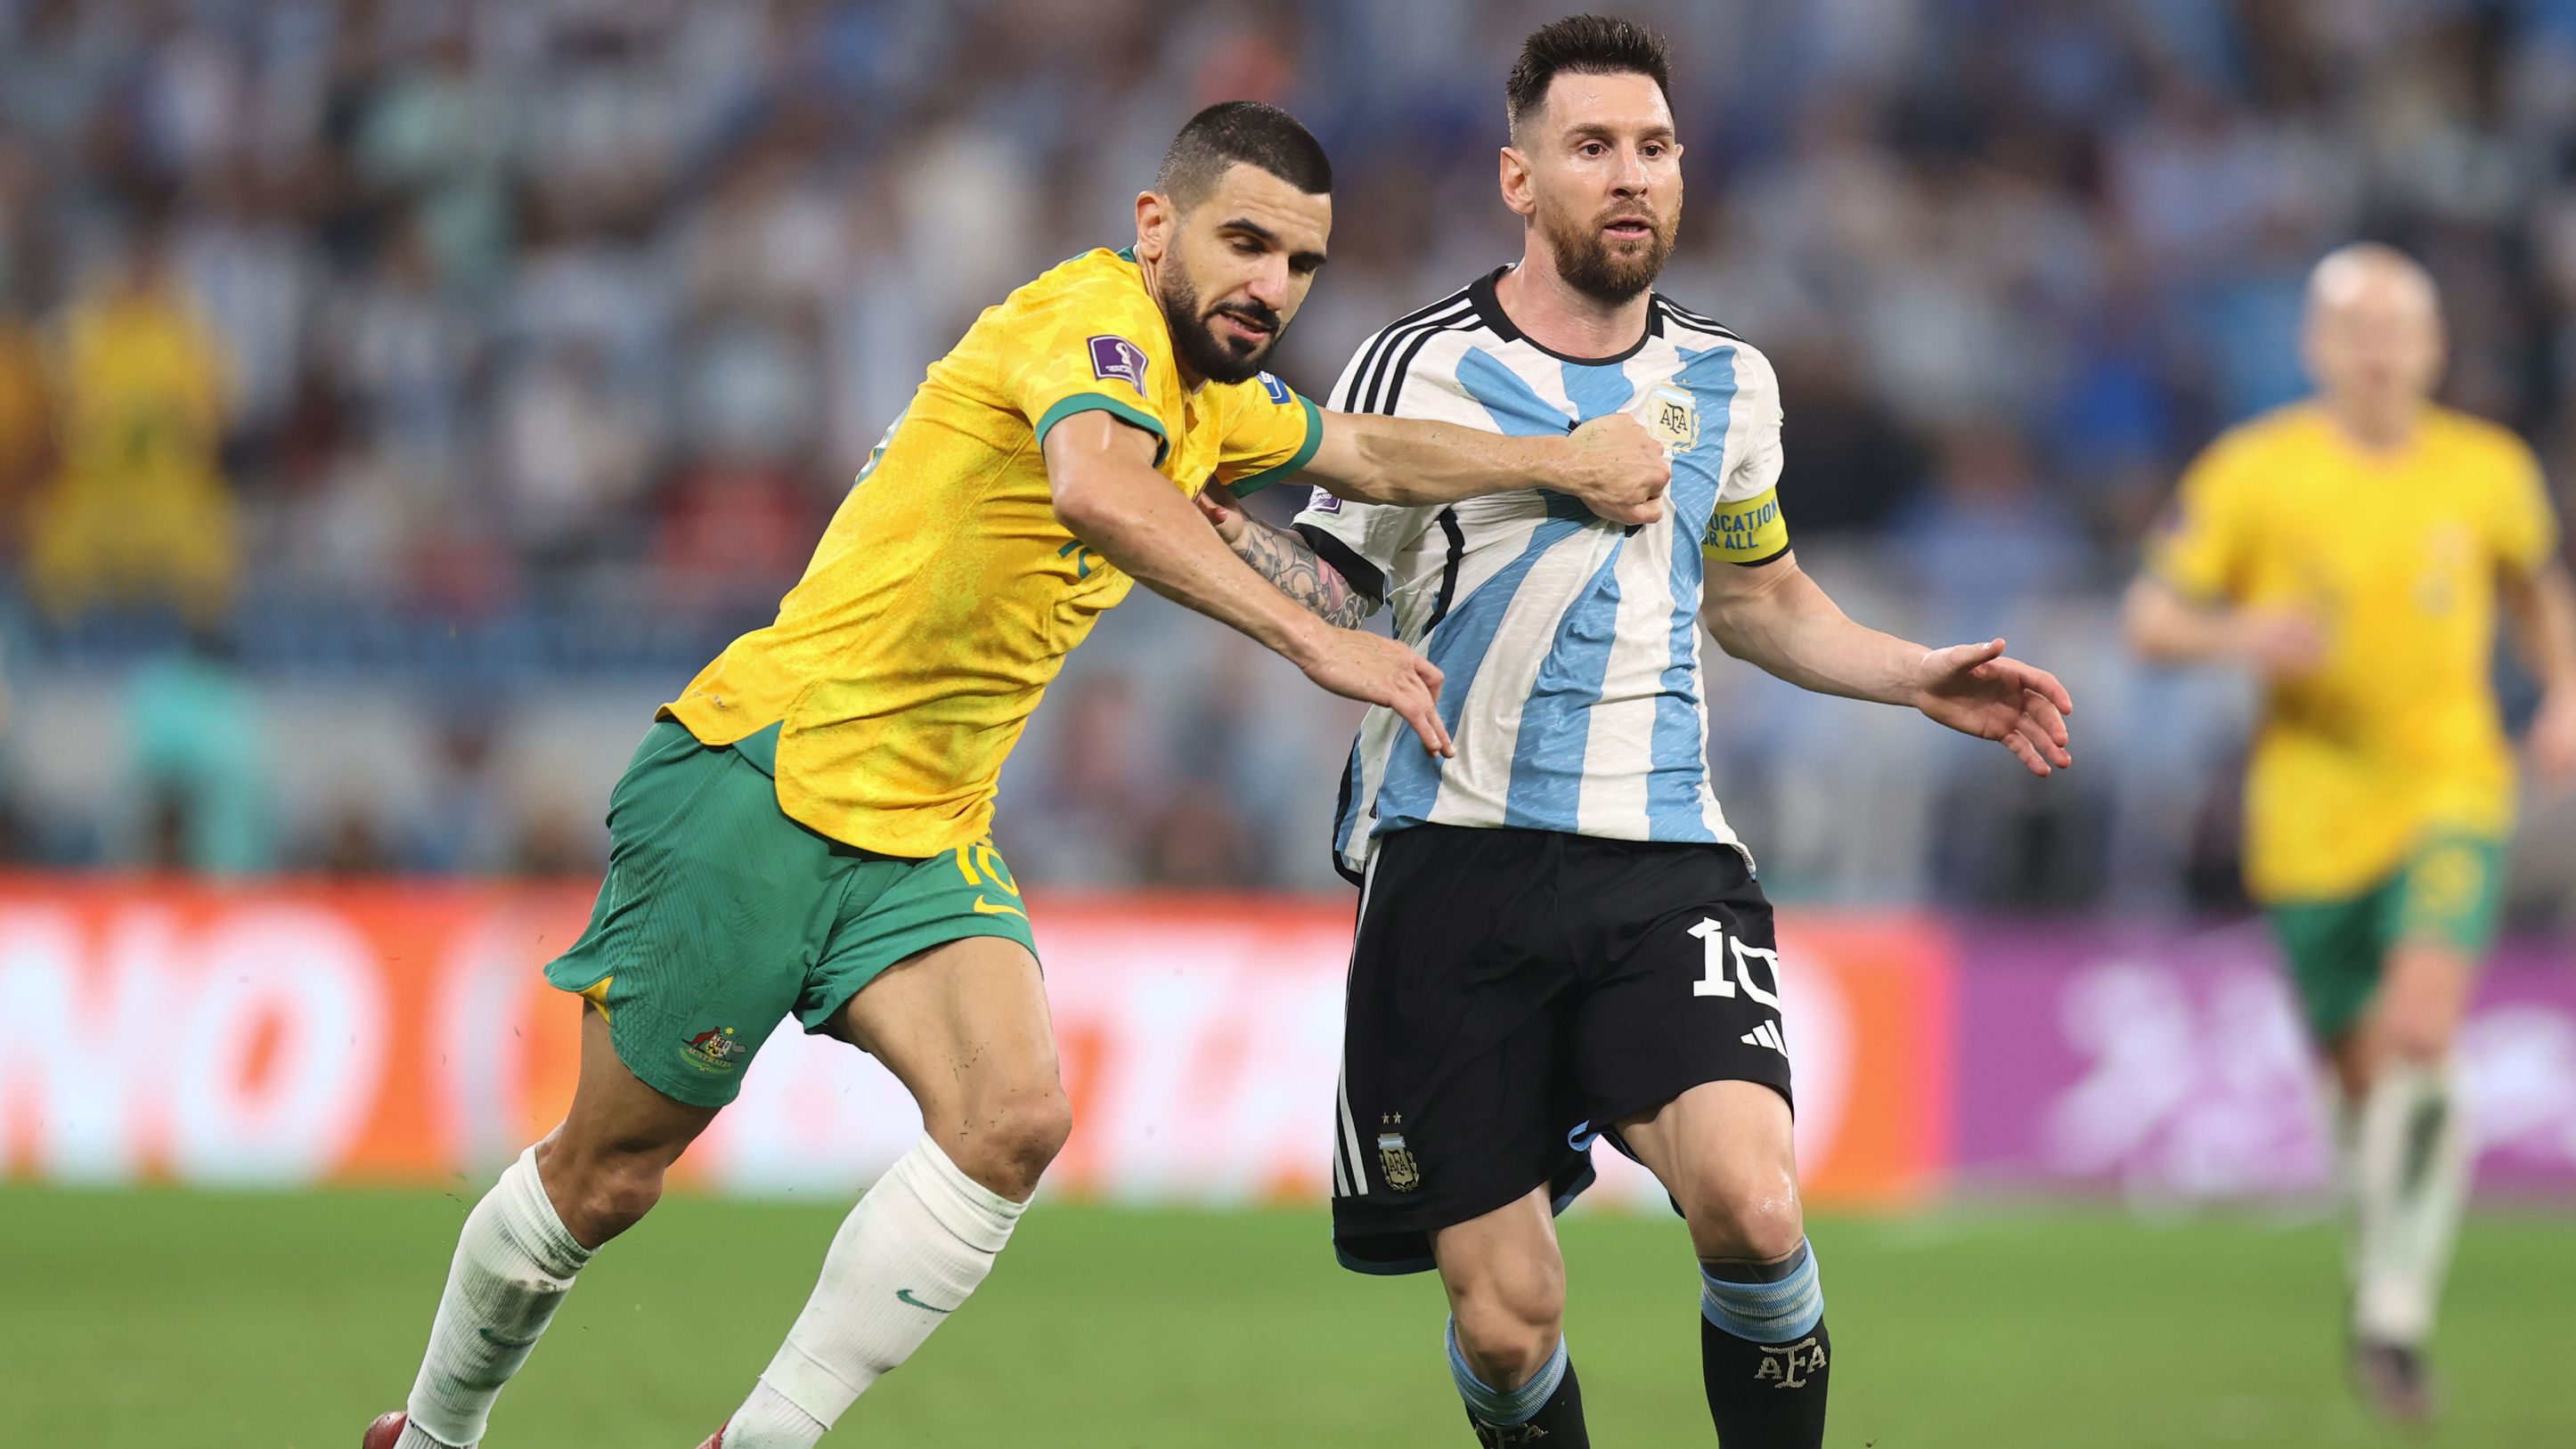 Aziz Behich of Australia and Lionel Messi of Argentina scuffle during the FIFA World Cup round of 16 match. (Photo by Charlotte Wilson/Offside/Offside via Getty Images)